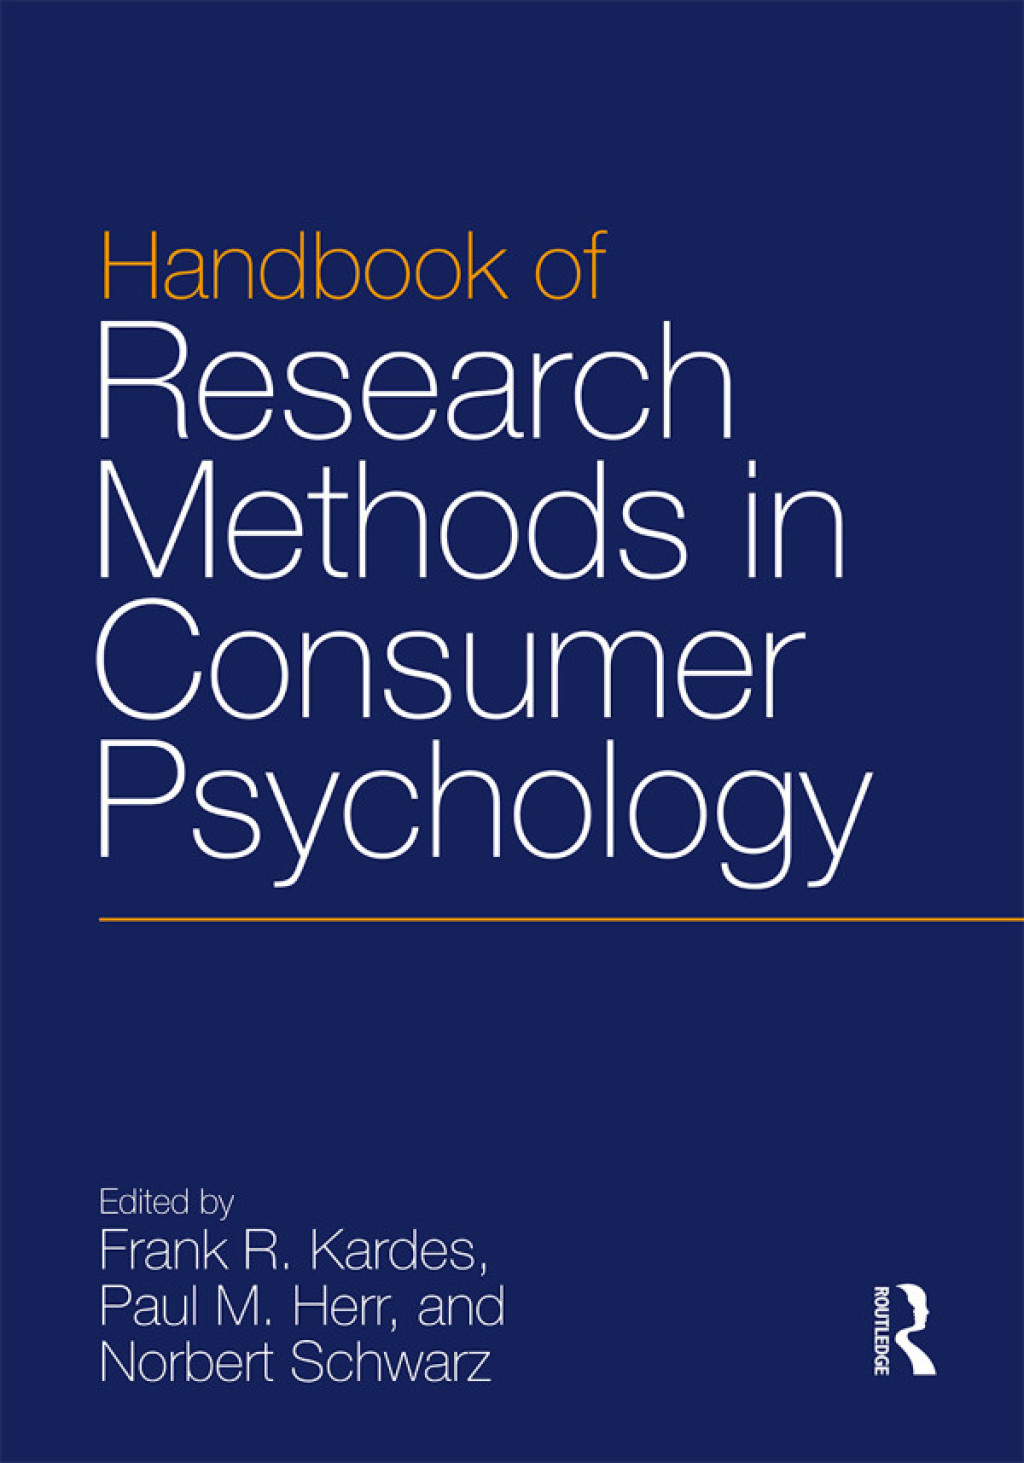 ISBN 9780815352983 product image for Handbook of Research Methods in Consumer Psychology - 1st Edition (eBook Rental) | upcitemdb.com